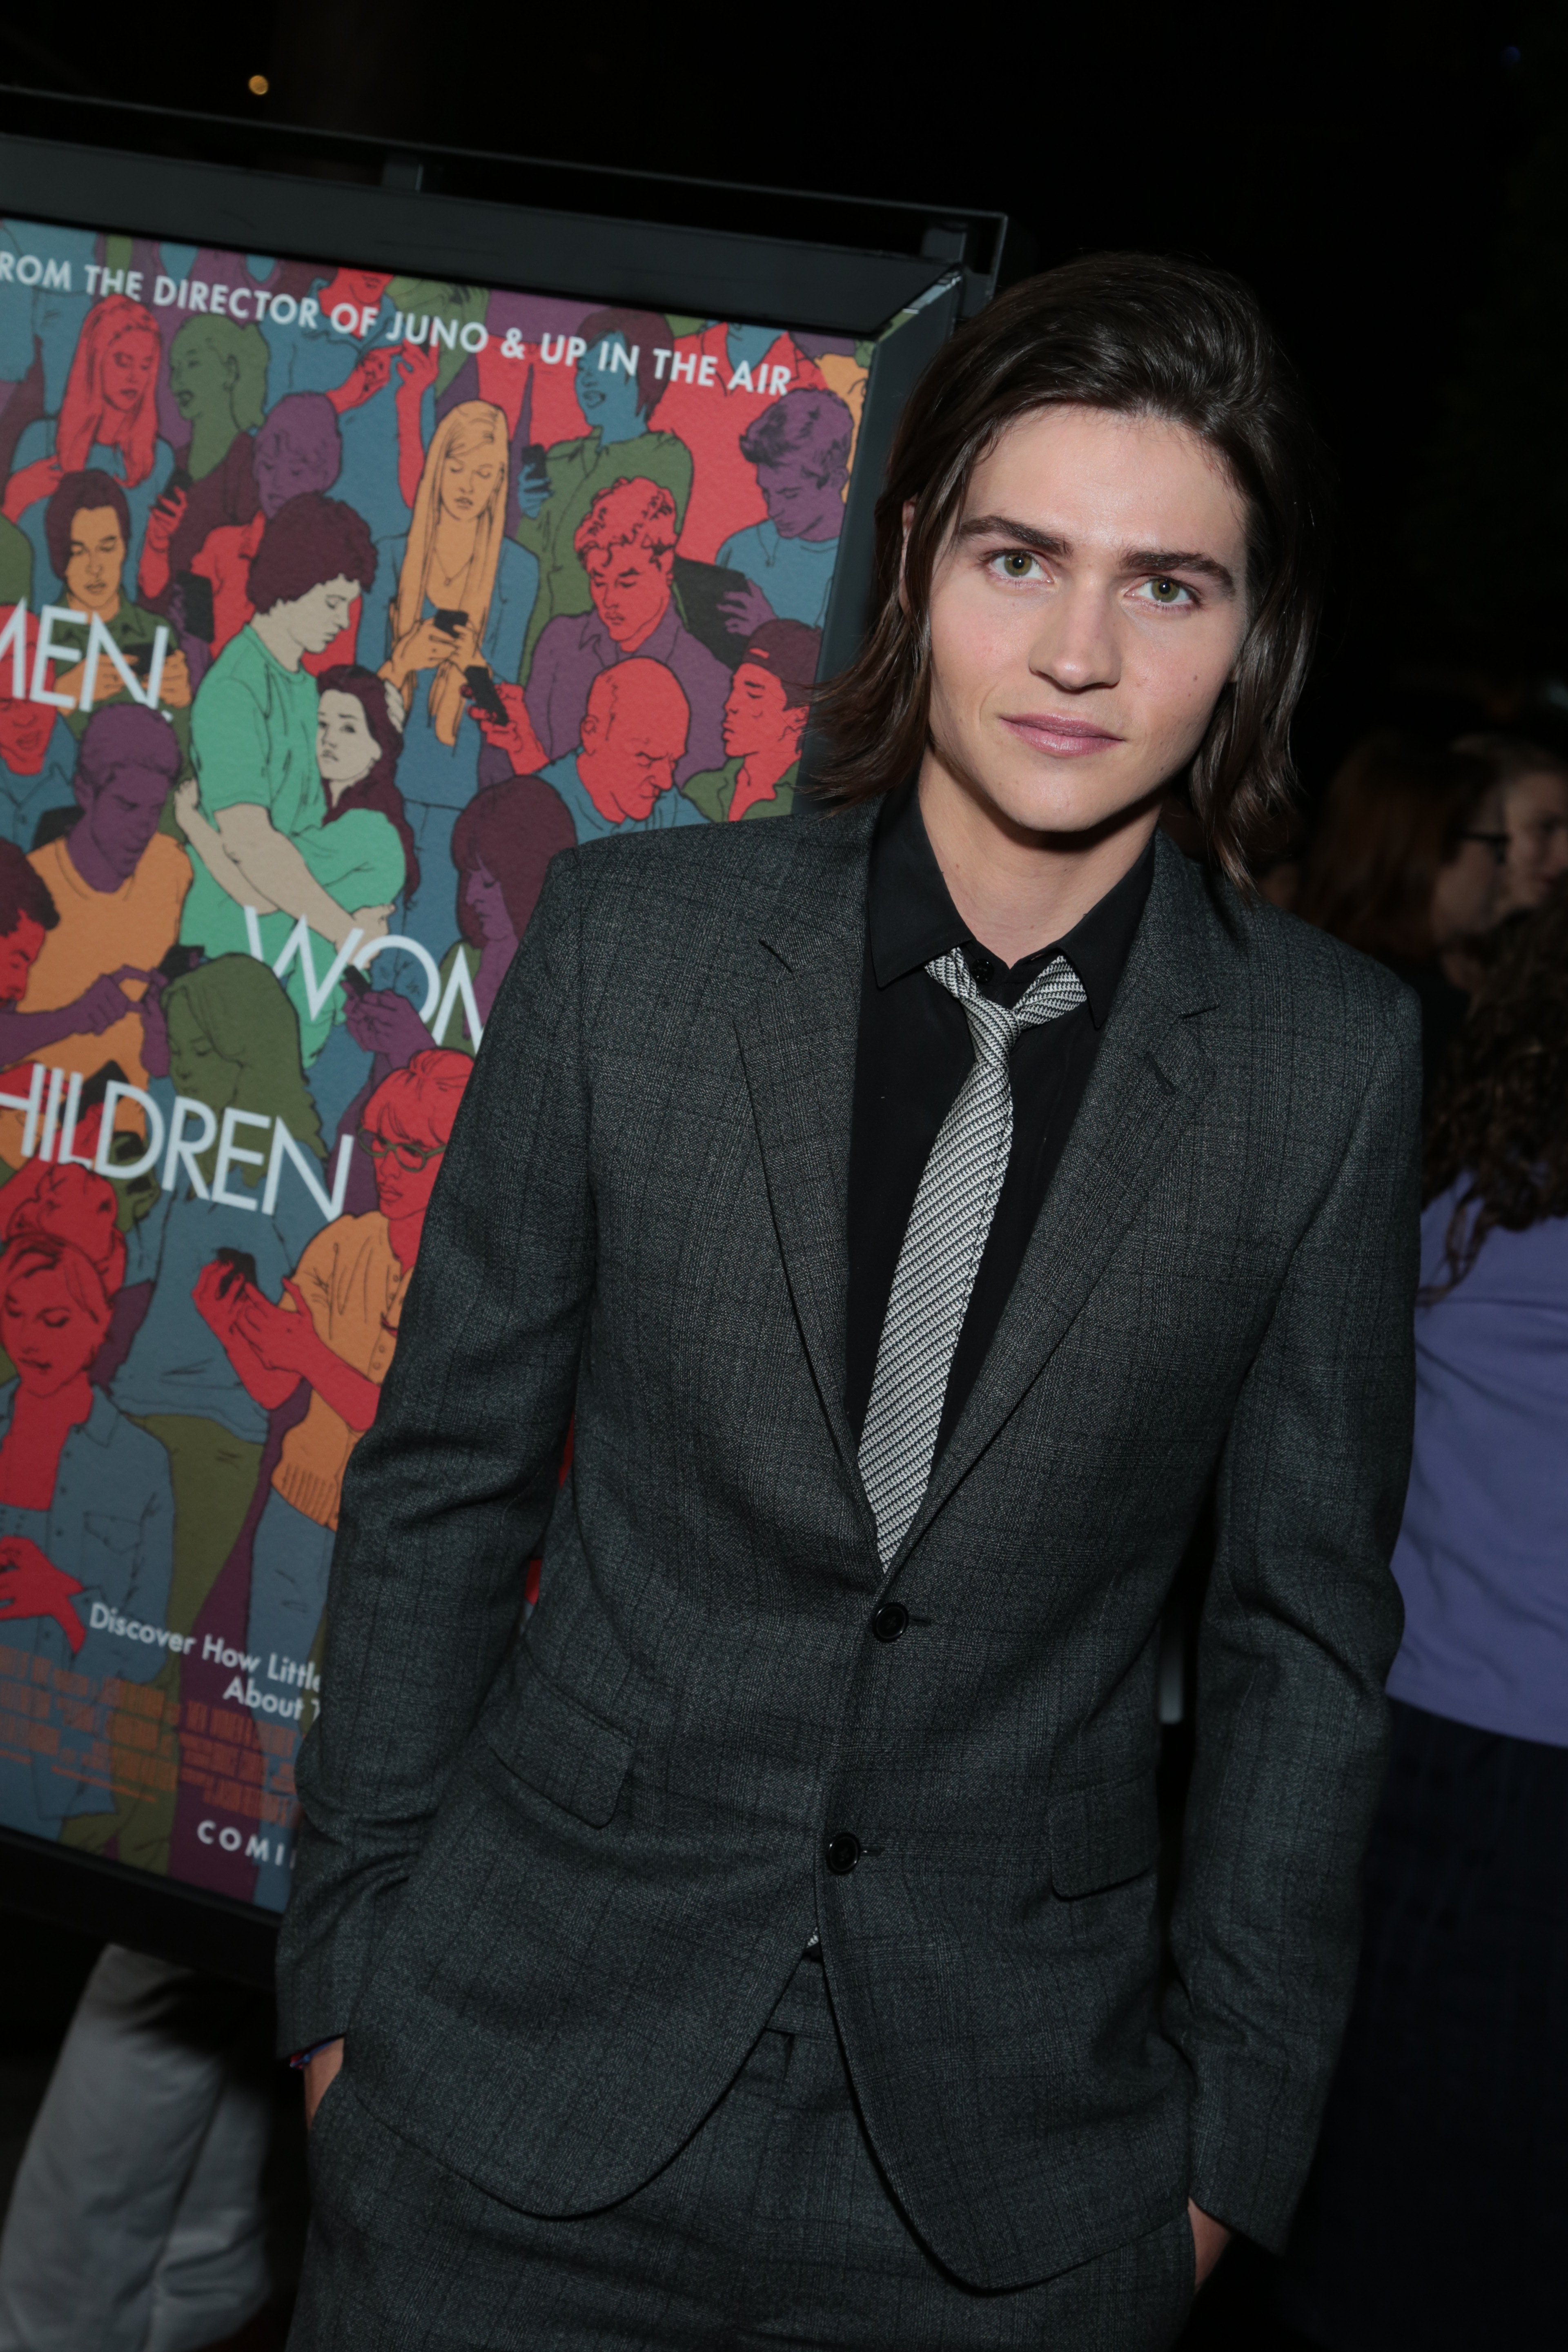 William Peltz attends the premiere of 'Men, Women and Children' at DGA Theater on September 30, 2014 in Los Angeles, California